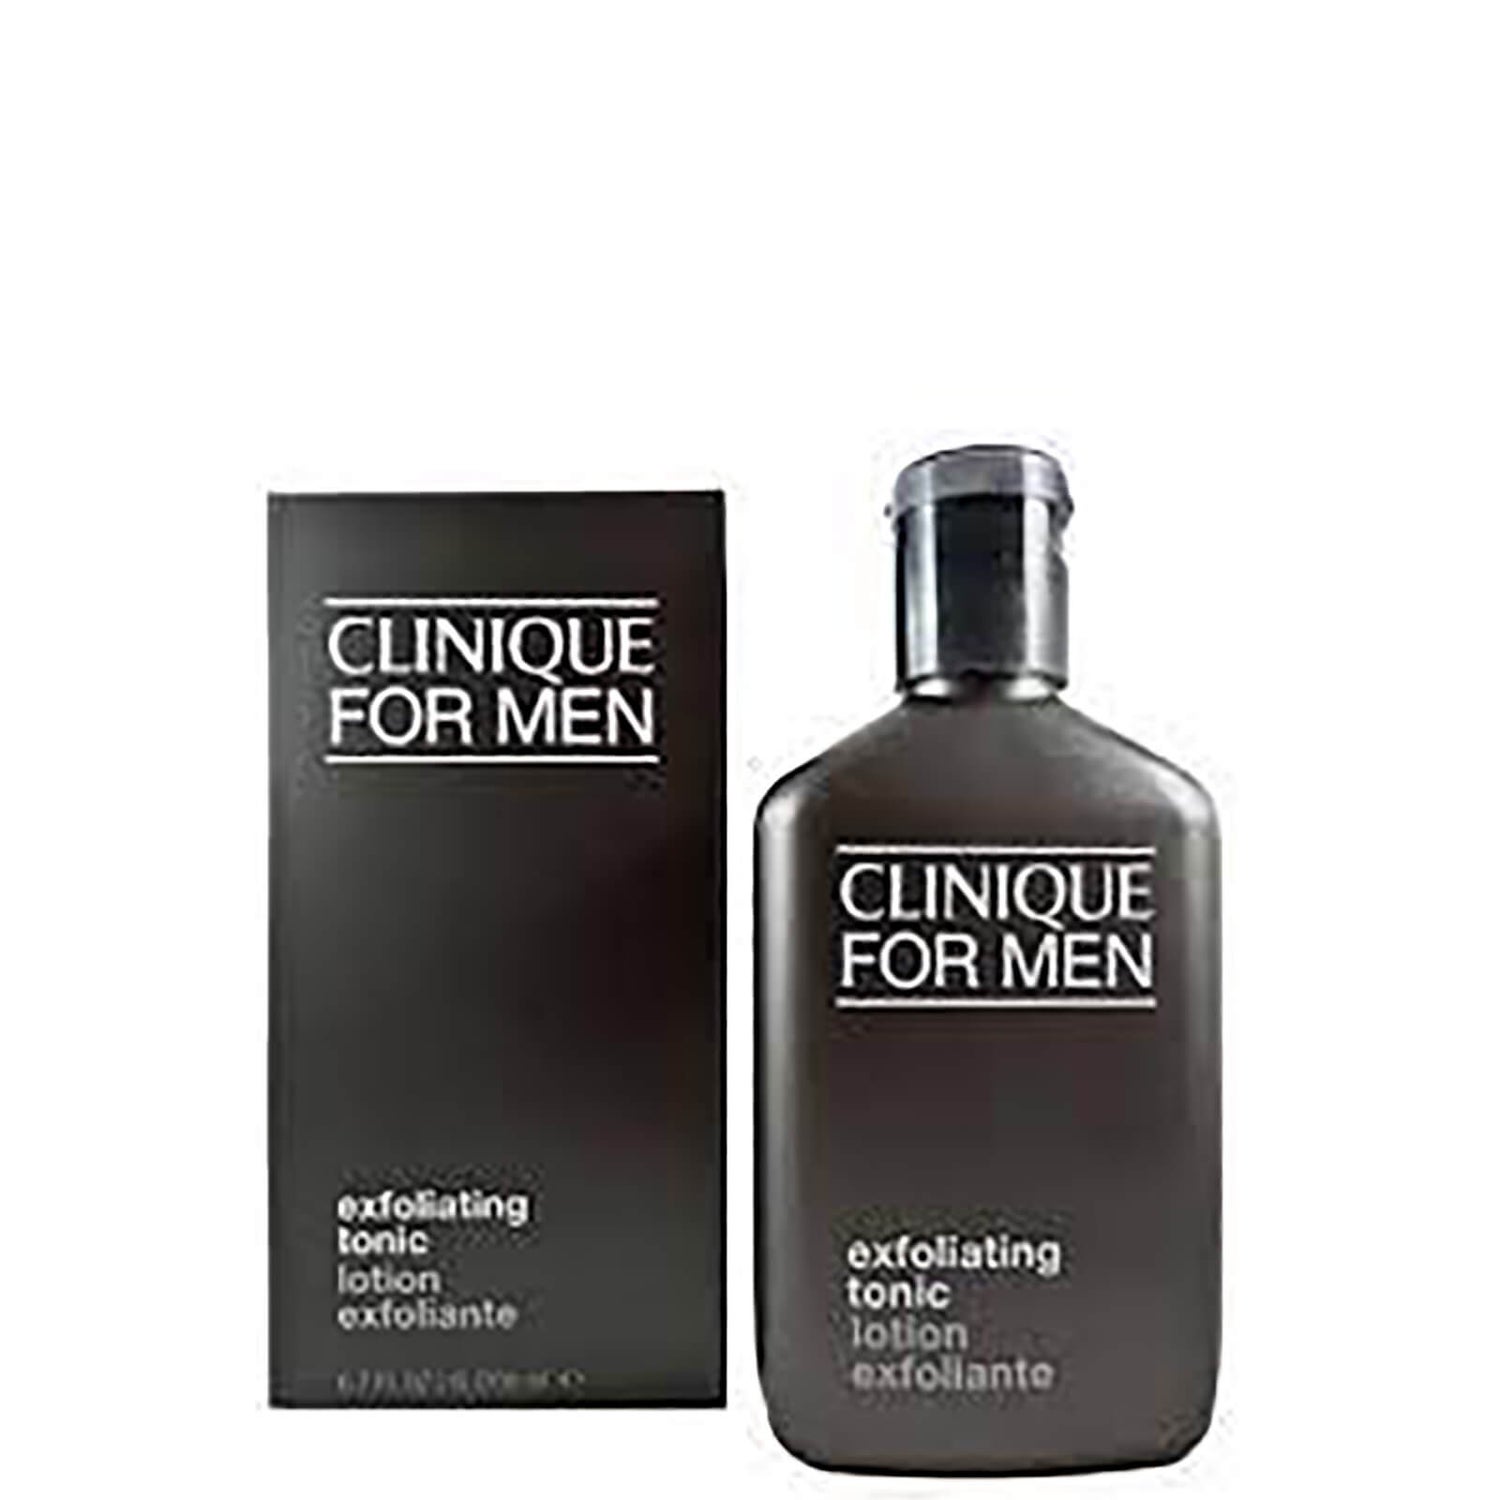 Clinique For Men Scruffing Lotion 2.5 200ml